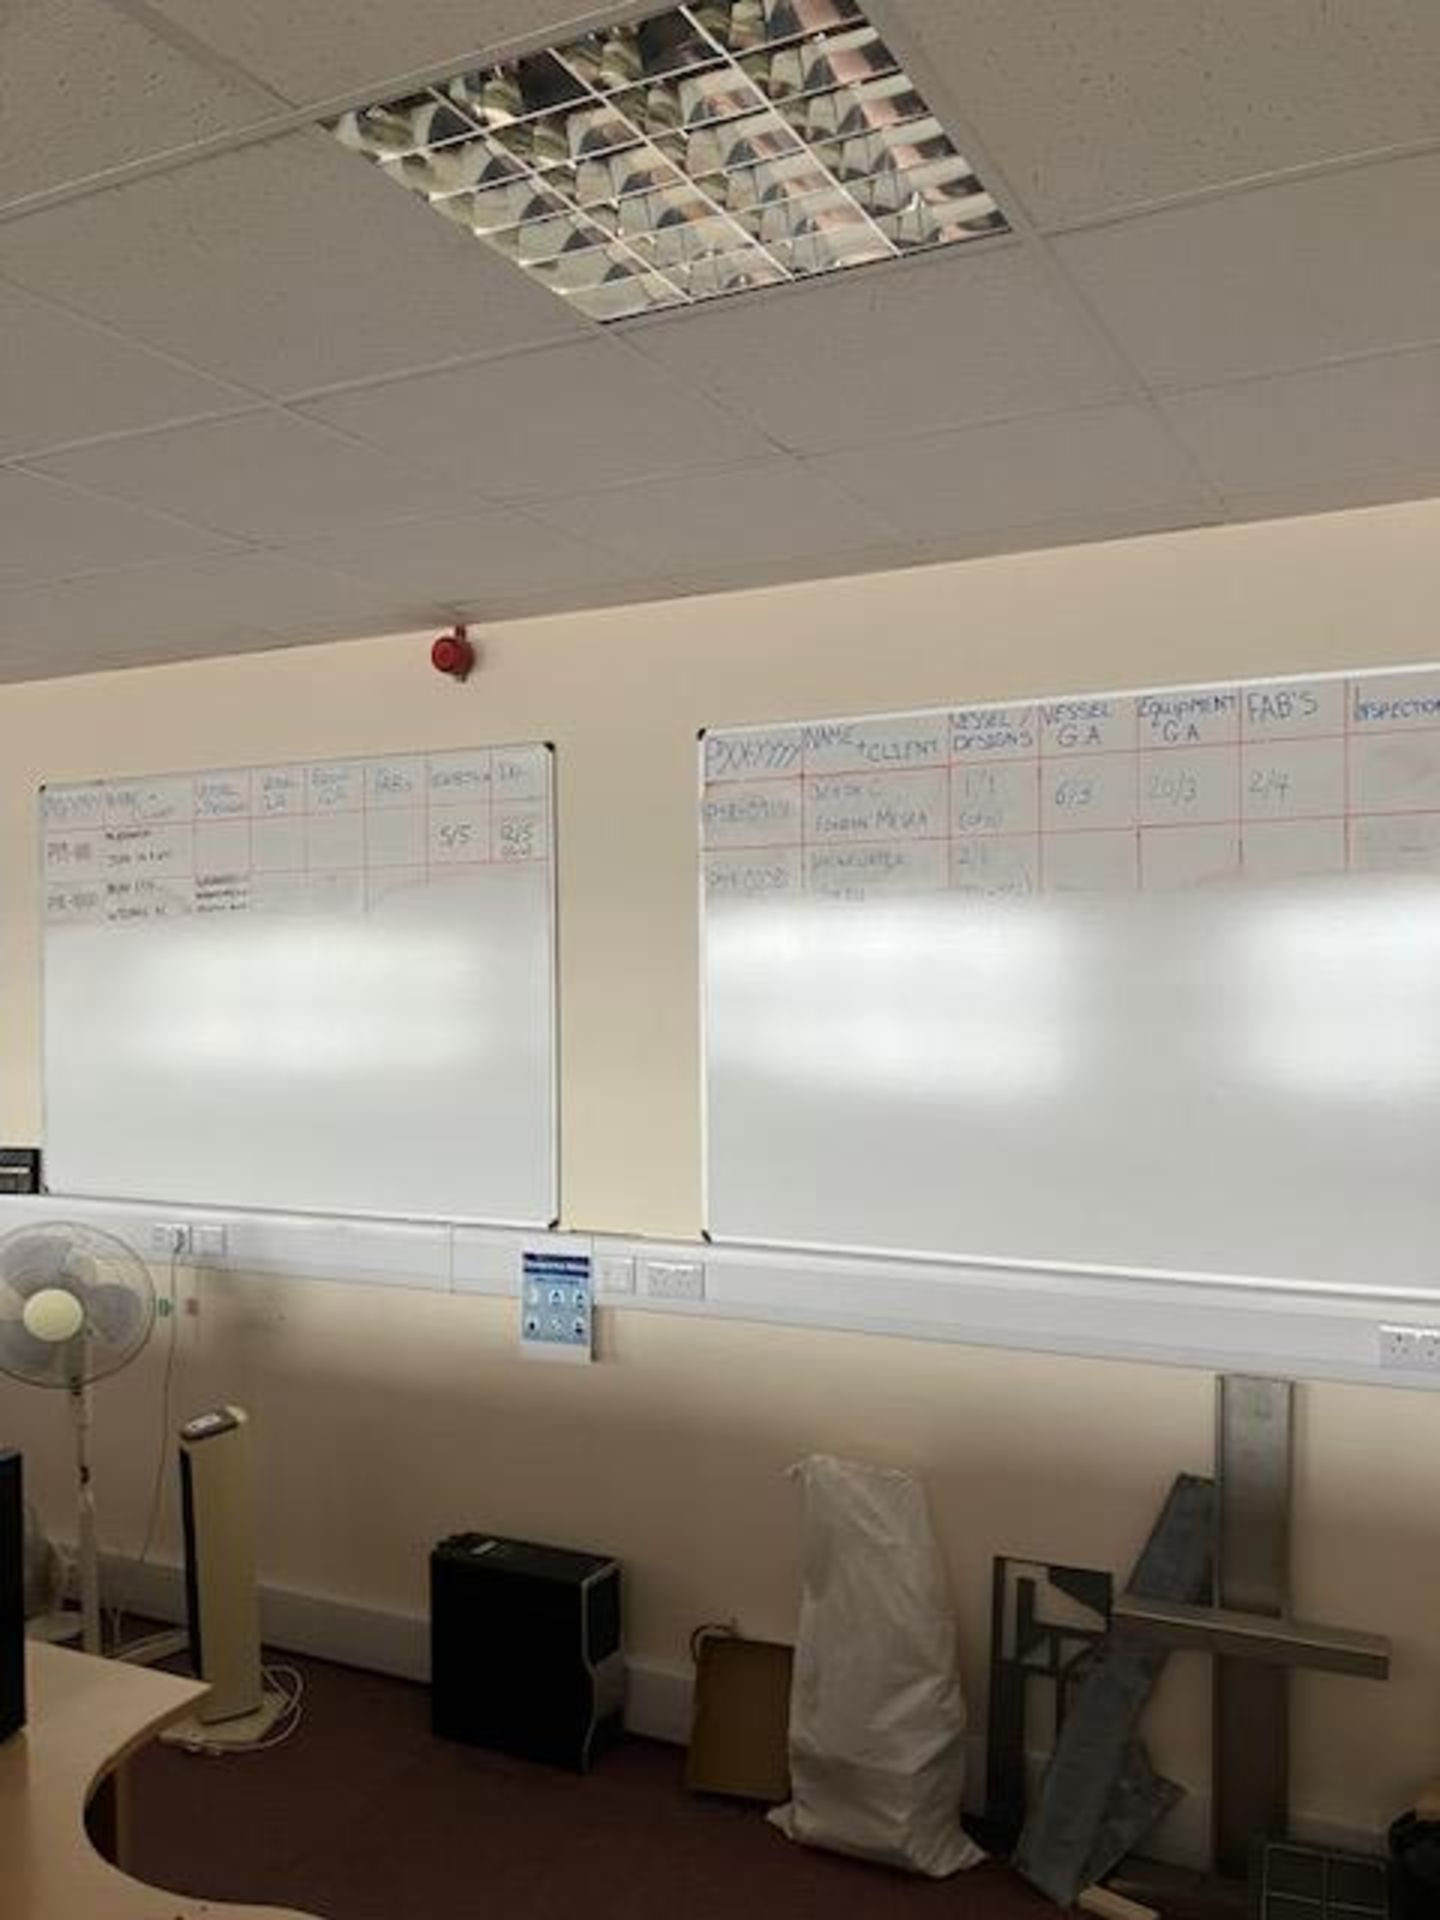 Six whiteboards, approx 1.8 x 1.2m, two whiteboards approx 1.2 x 800m - Image 4 of 5